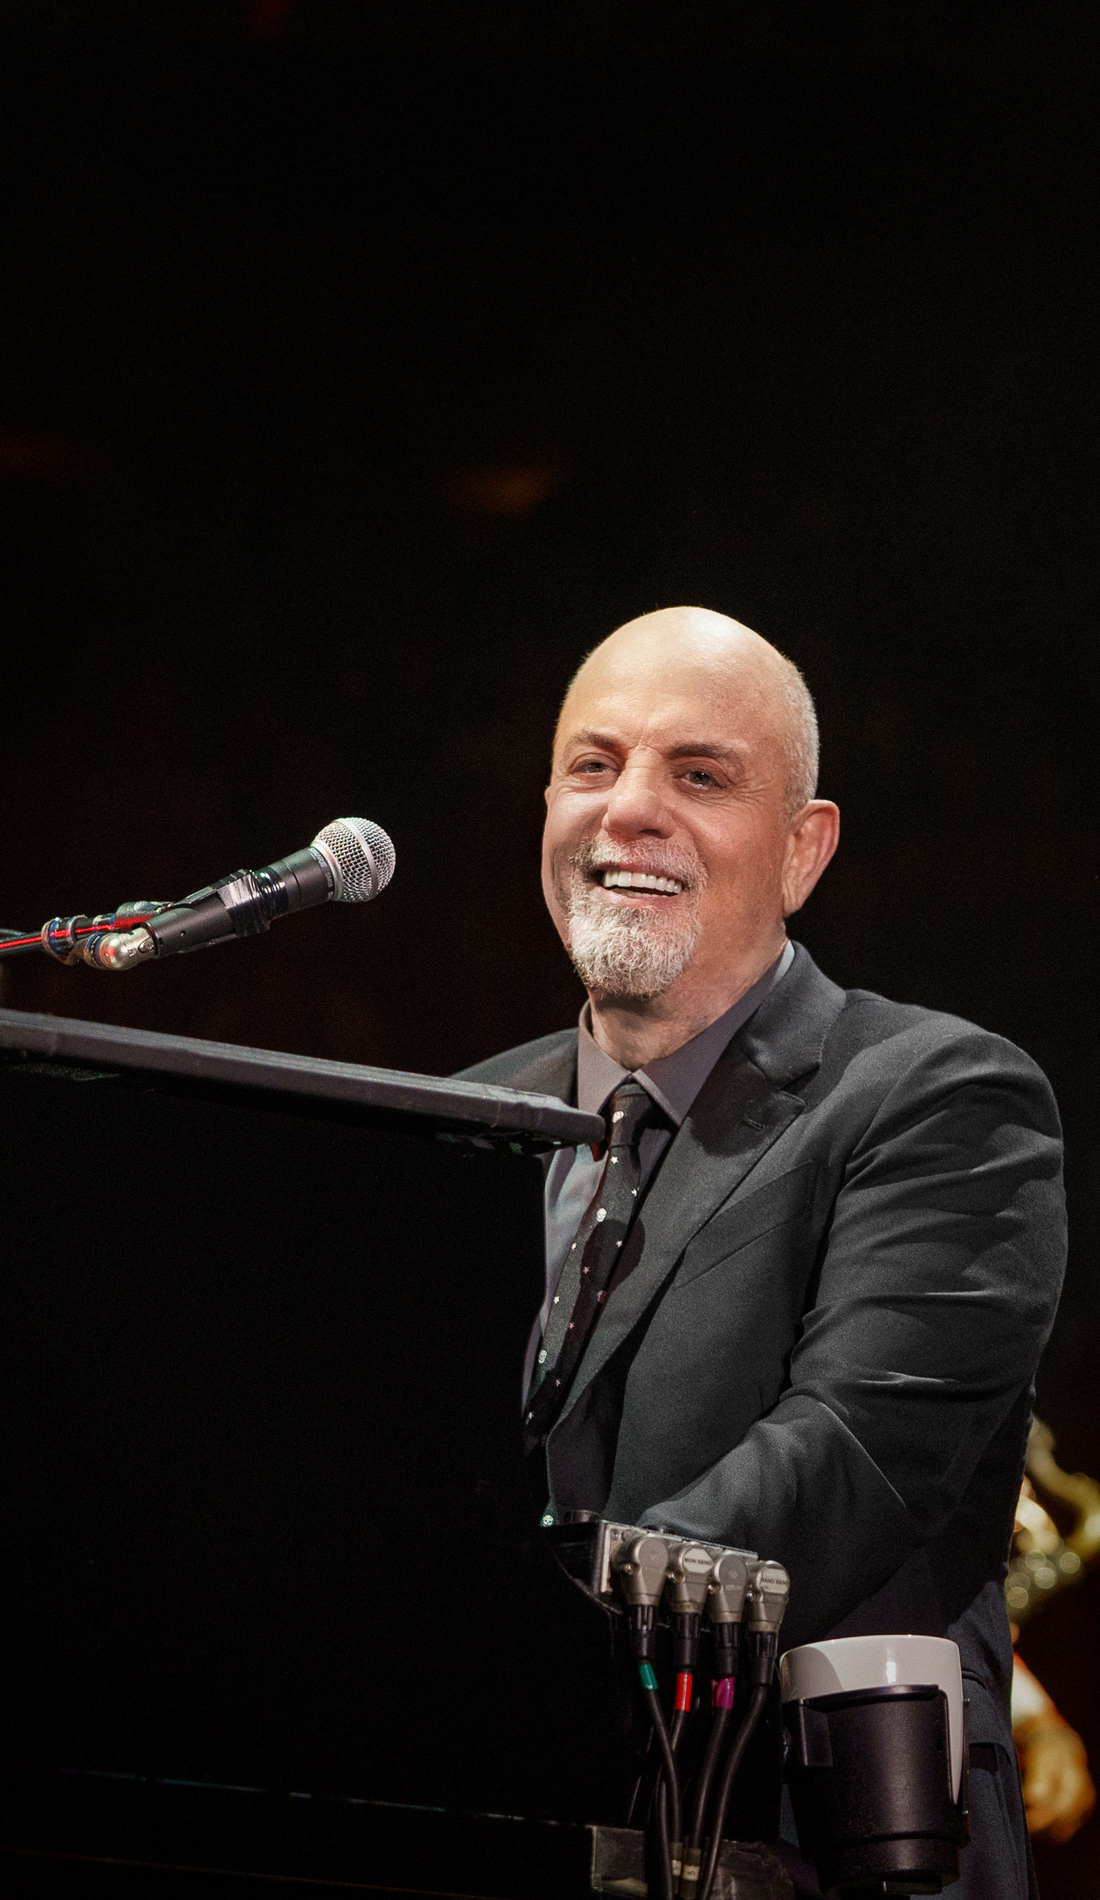 A Billy Joel live event